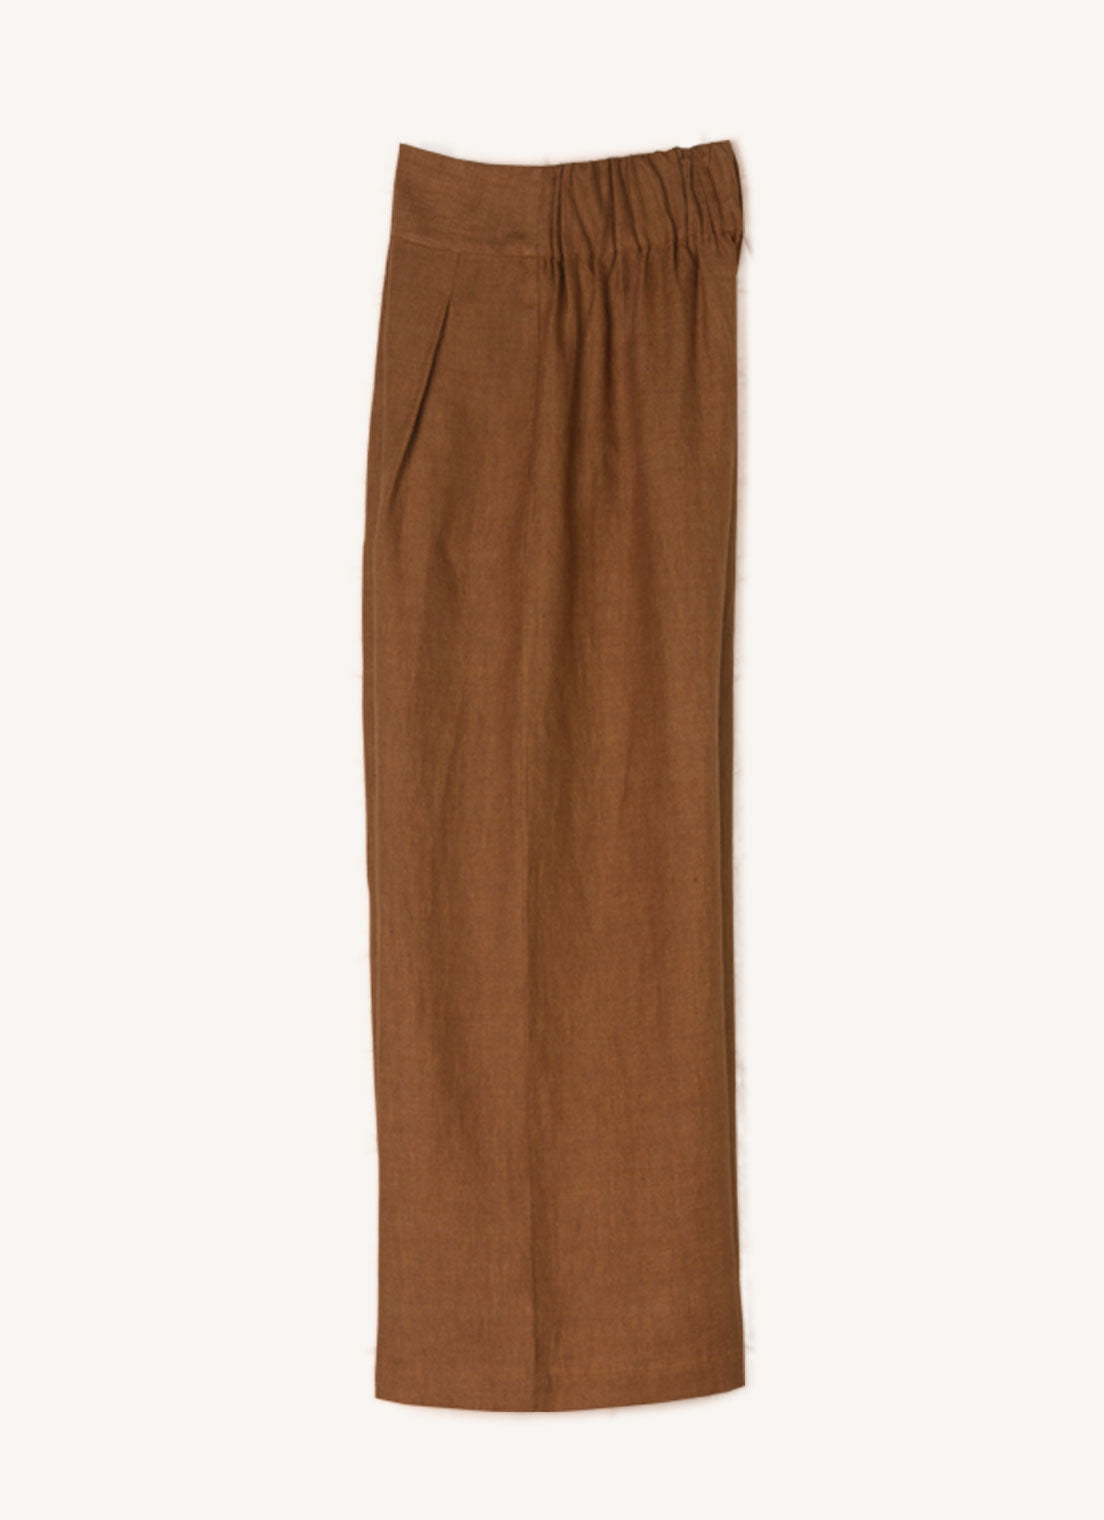 A bronze, wide-leg pants with wide and elasticated back waistband and side pockets in pure European linen